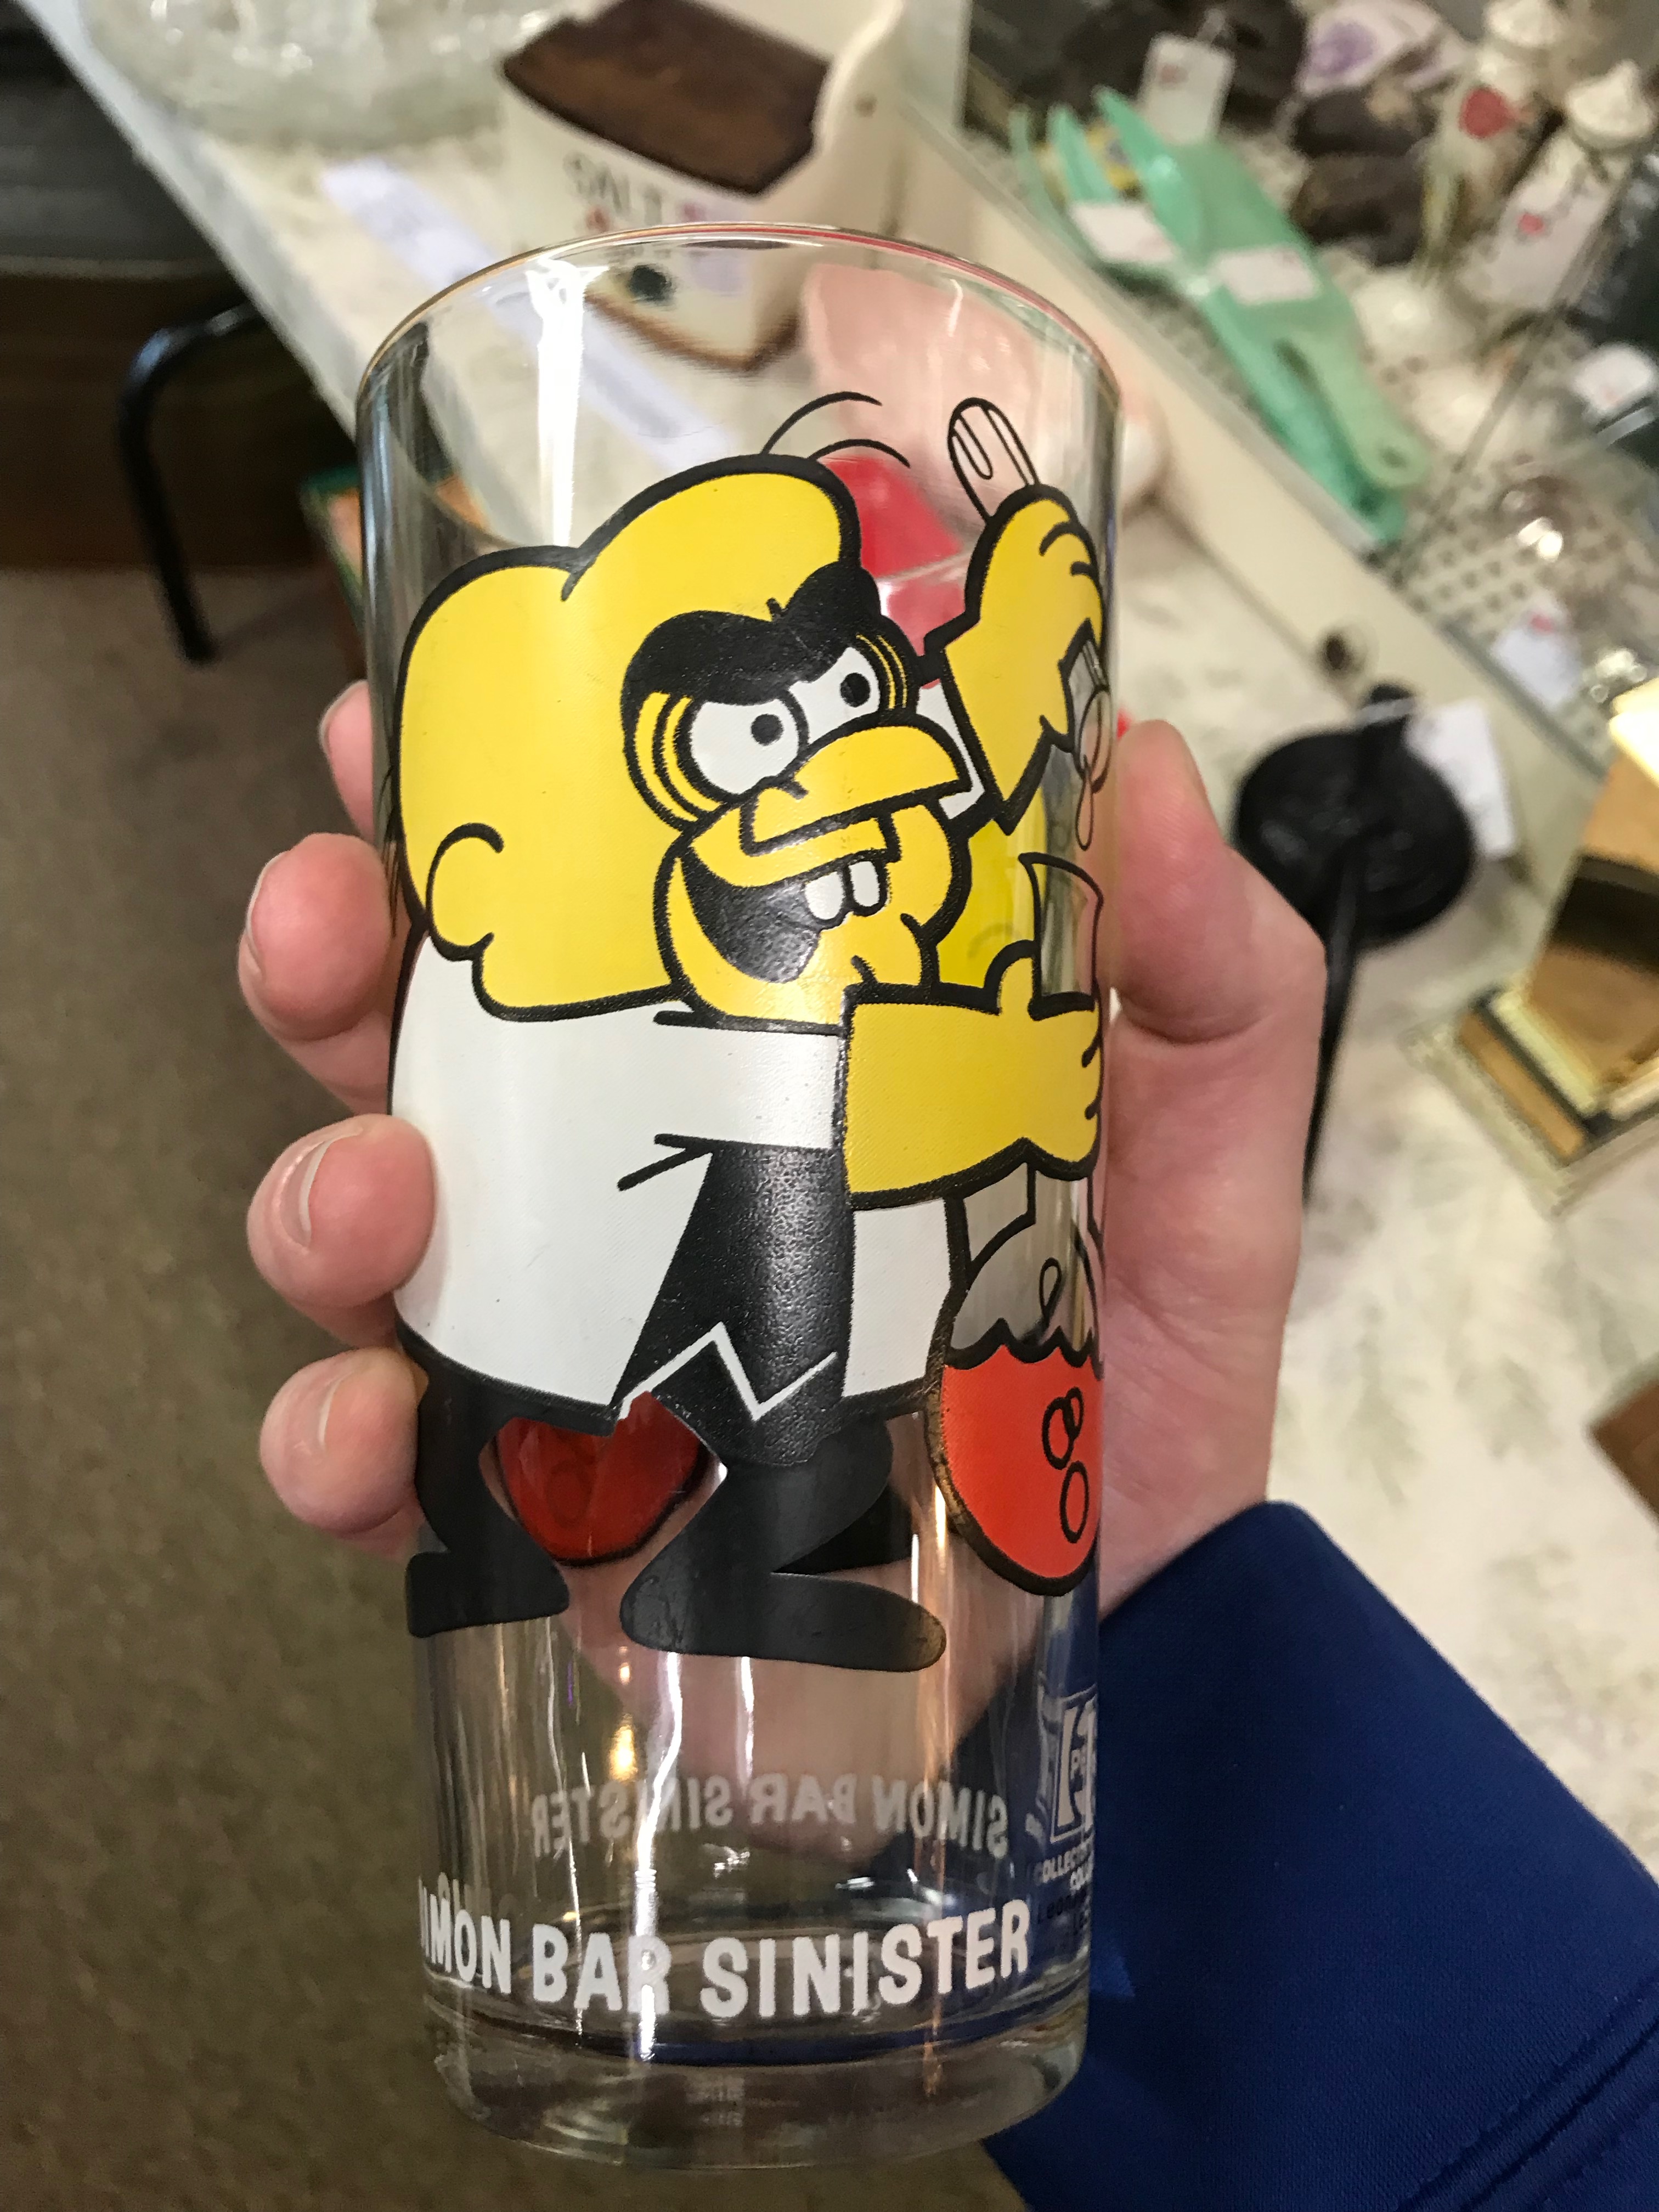 Drinking glass from the 80's with Simon Bar Sinister pictured on it.